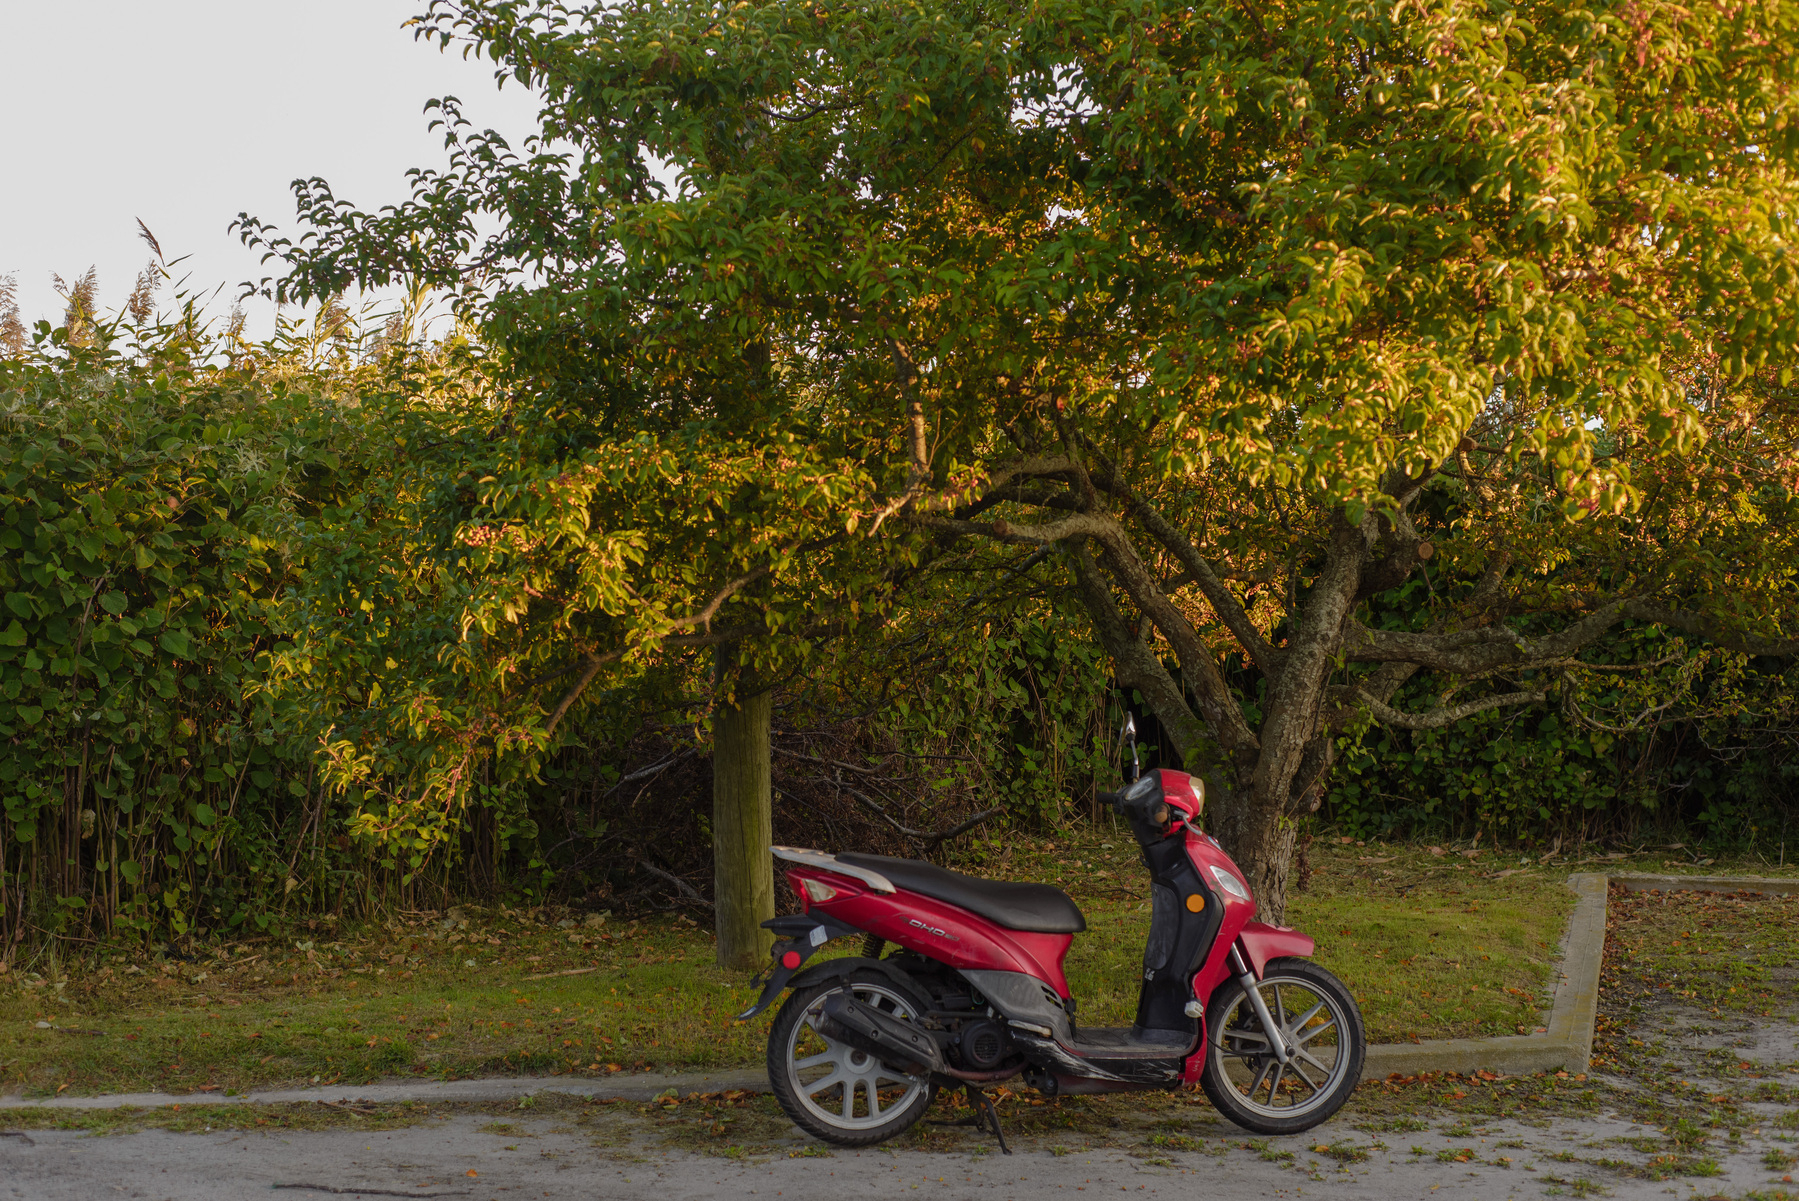 Red scooter in front of a tree and concrete curb.